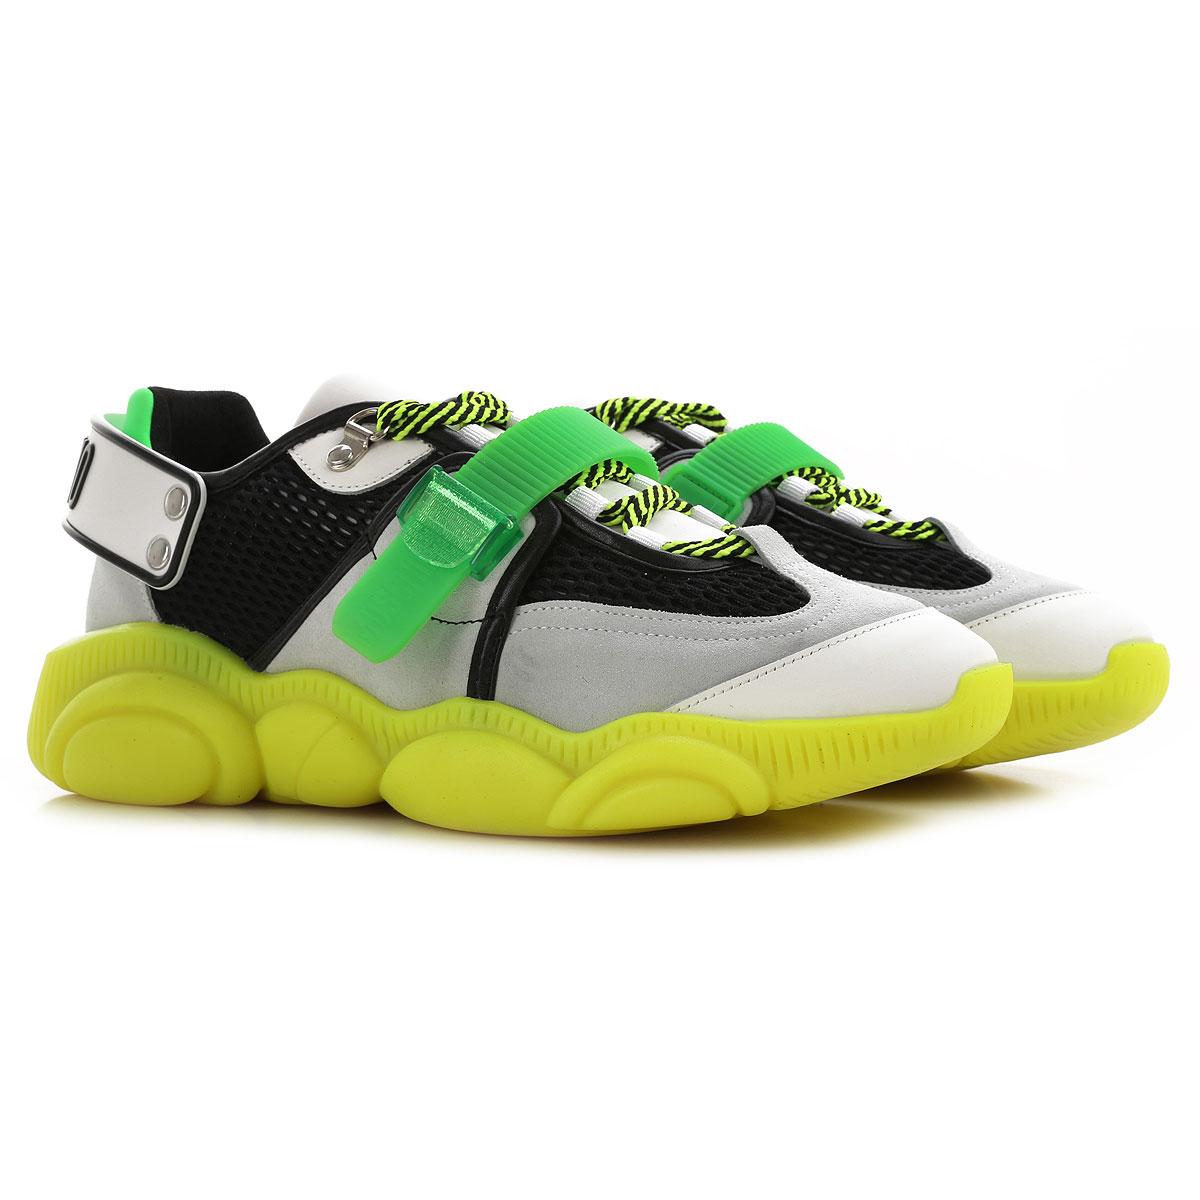 Moschino Teddy Shoes Fluo Sneakers in Yellow for Men - Save 26% - Lyst